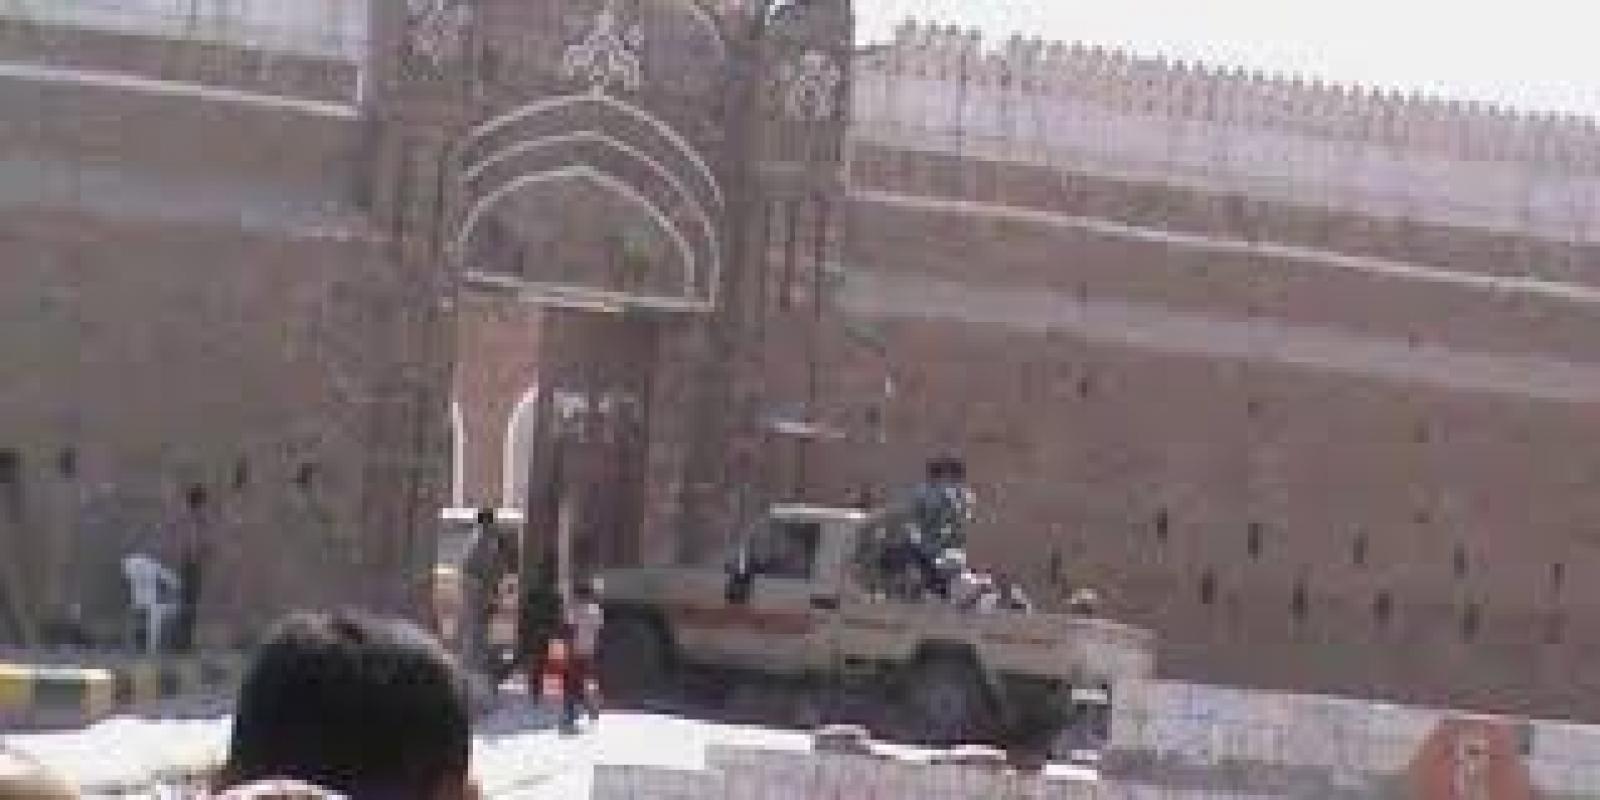 Image of Houthi members breaking into the Corniche Castle, Press 24, 11 August 2015